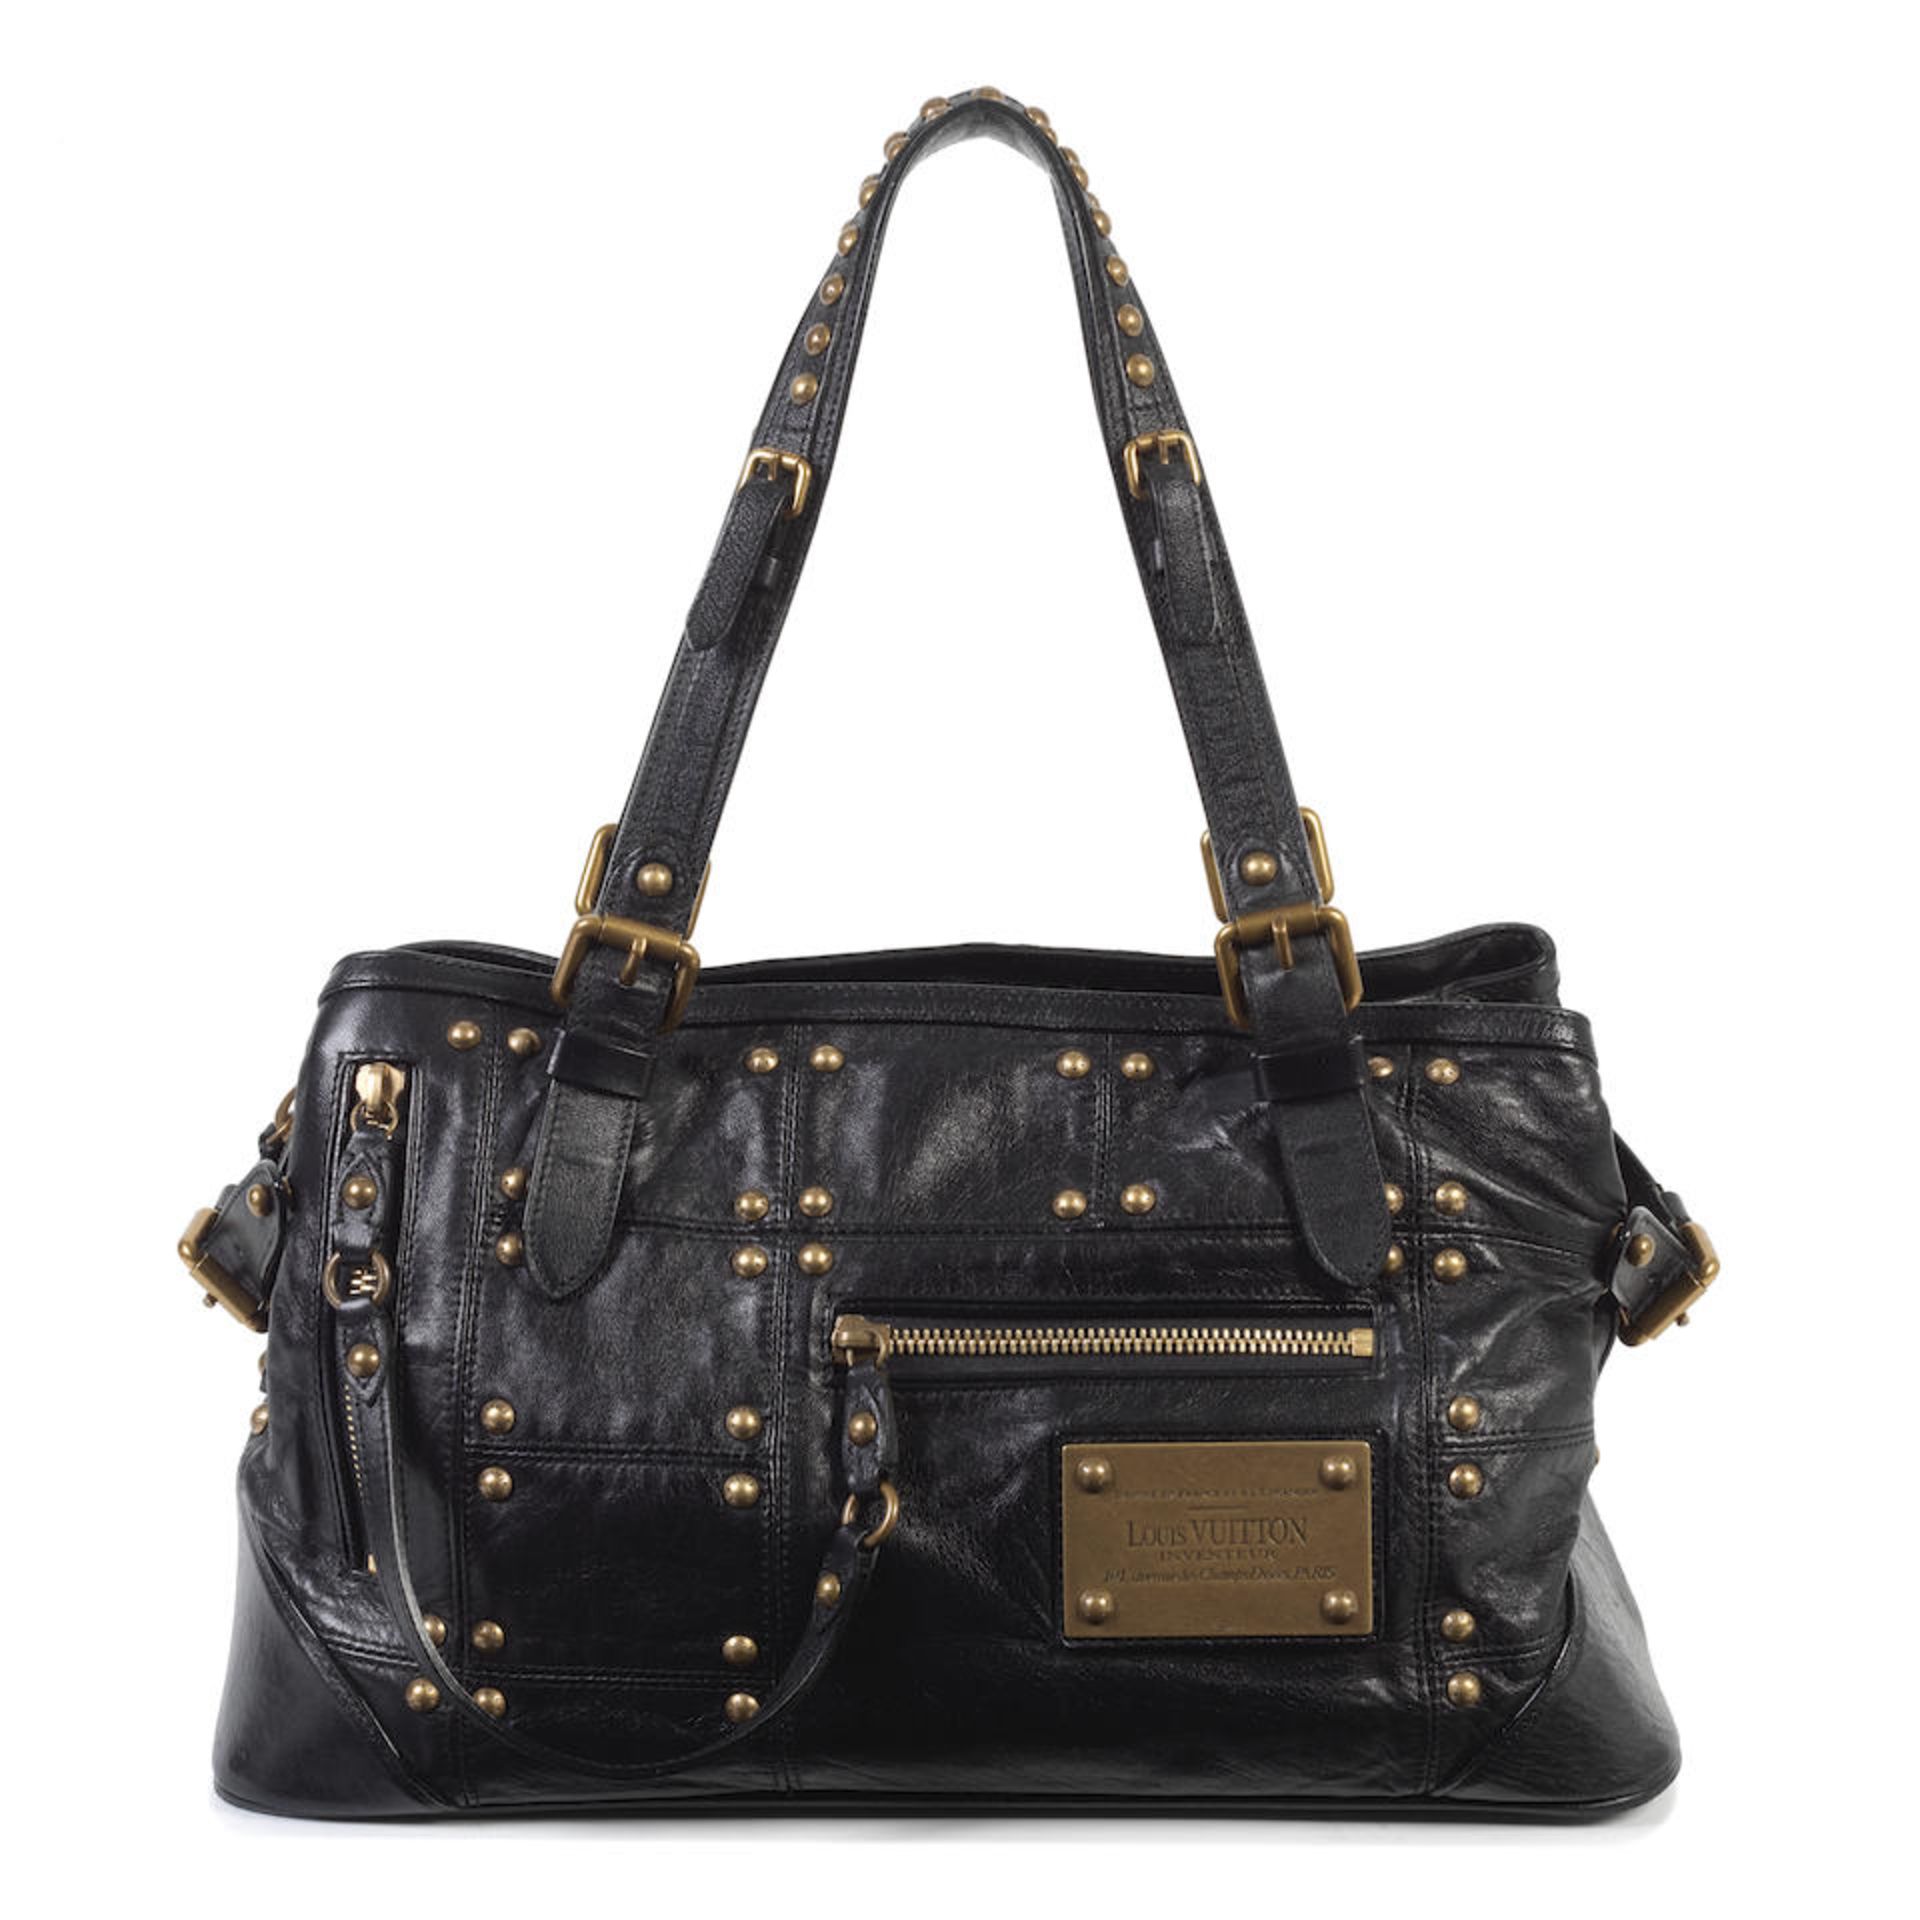 Louis Vuitton: a Black Leather Riveting Tote 2006 (includes dust bag and copy of receipt)